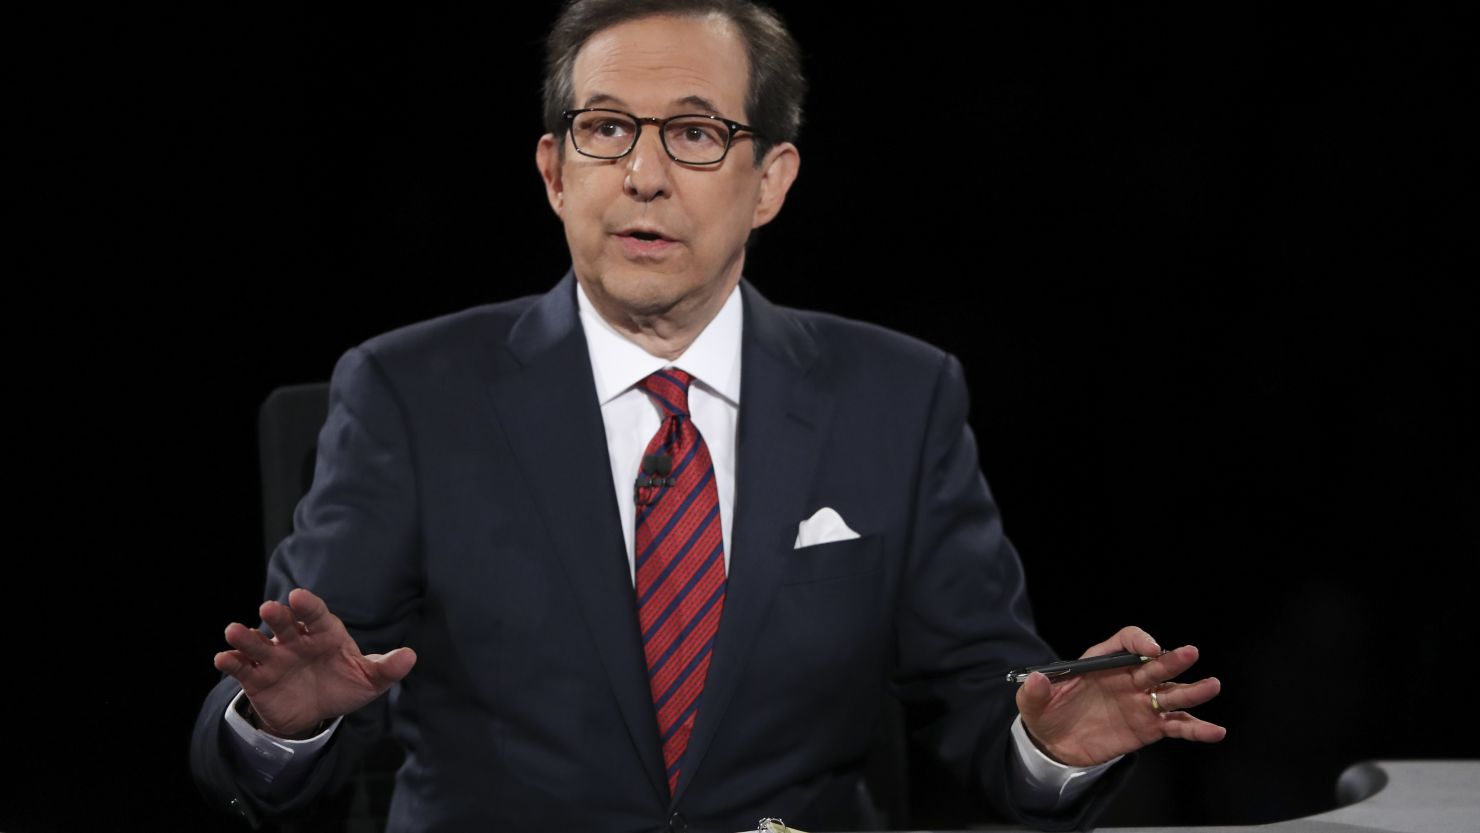 Moderator Chris Wallace of Fox News guides the discussion on Wednesday between Democratic presidential nominee Hillary Clinton and Republican nominee Donald Trump.